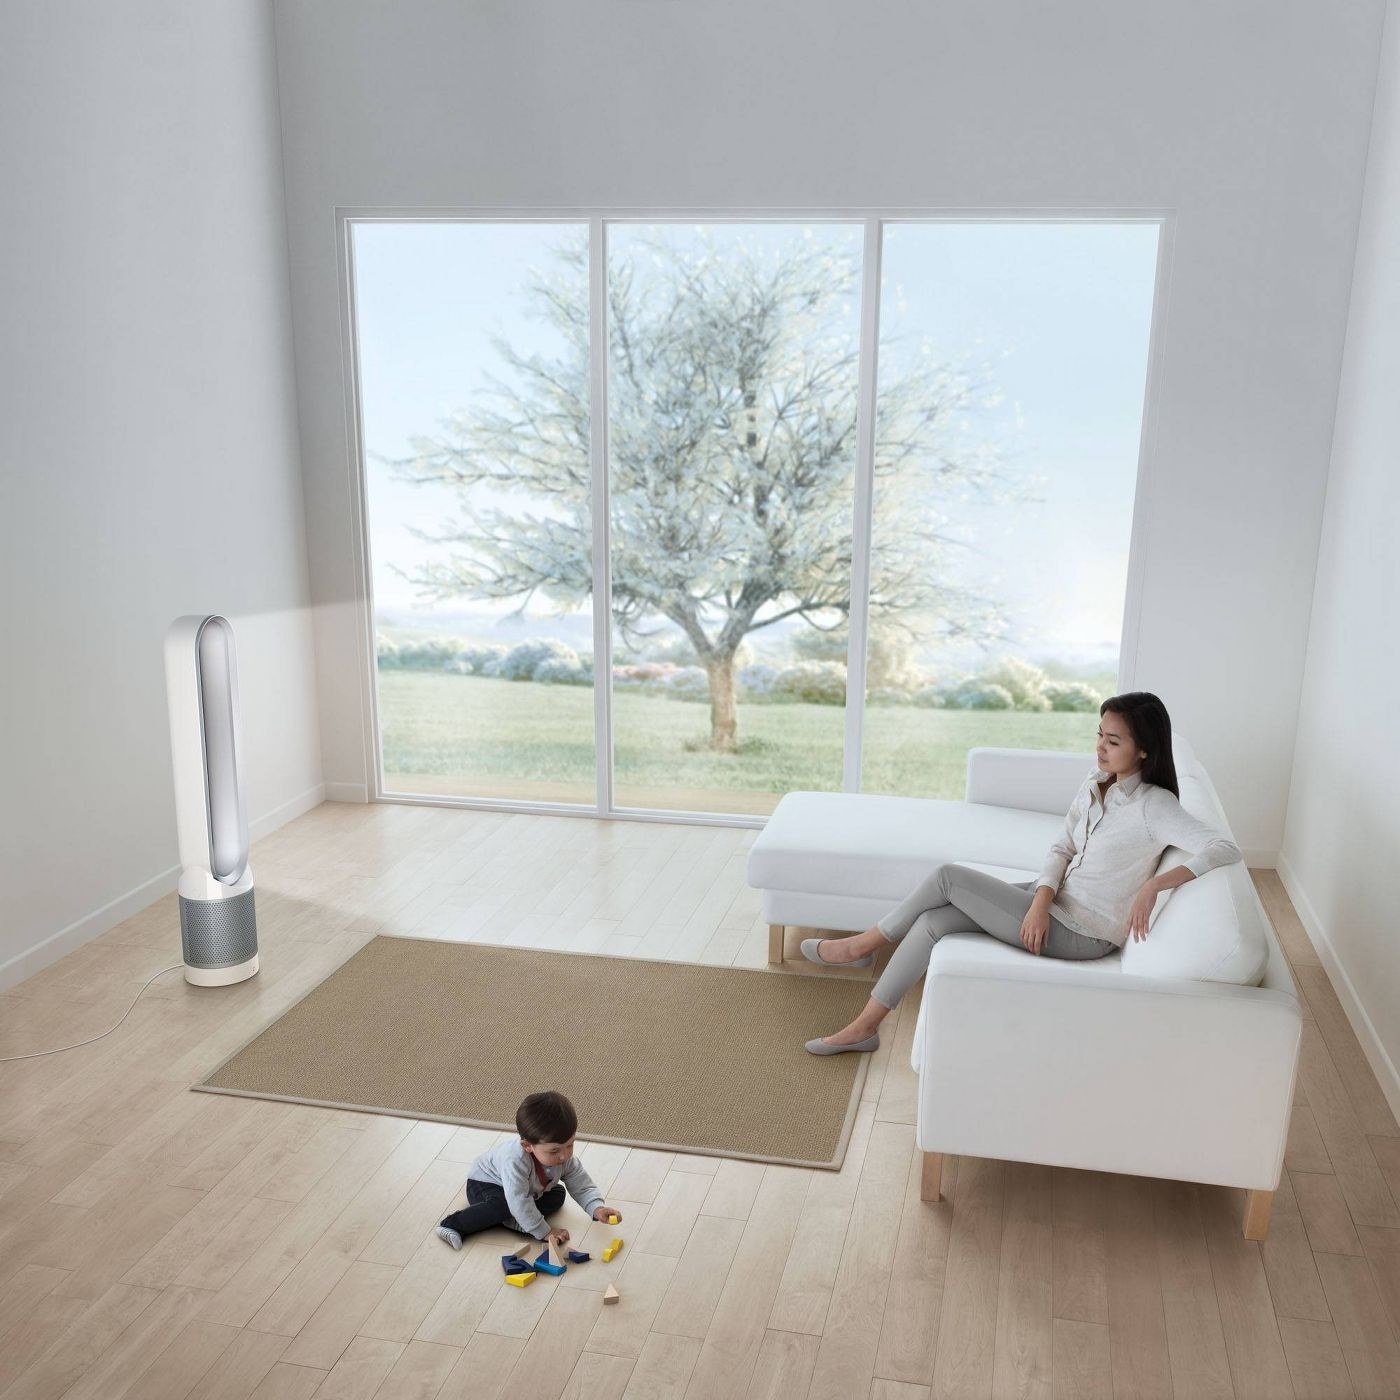 A woman sits on her couch watching a child play, which the Dyson fan oscillates in the room.